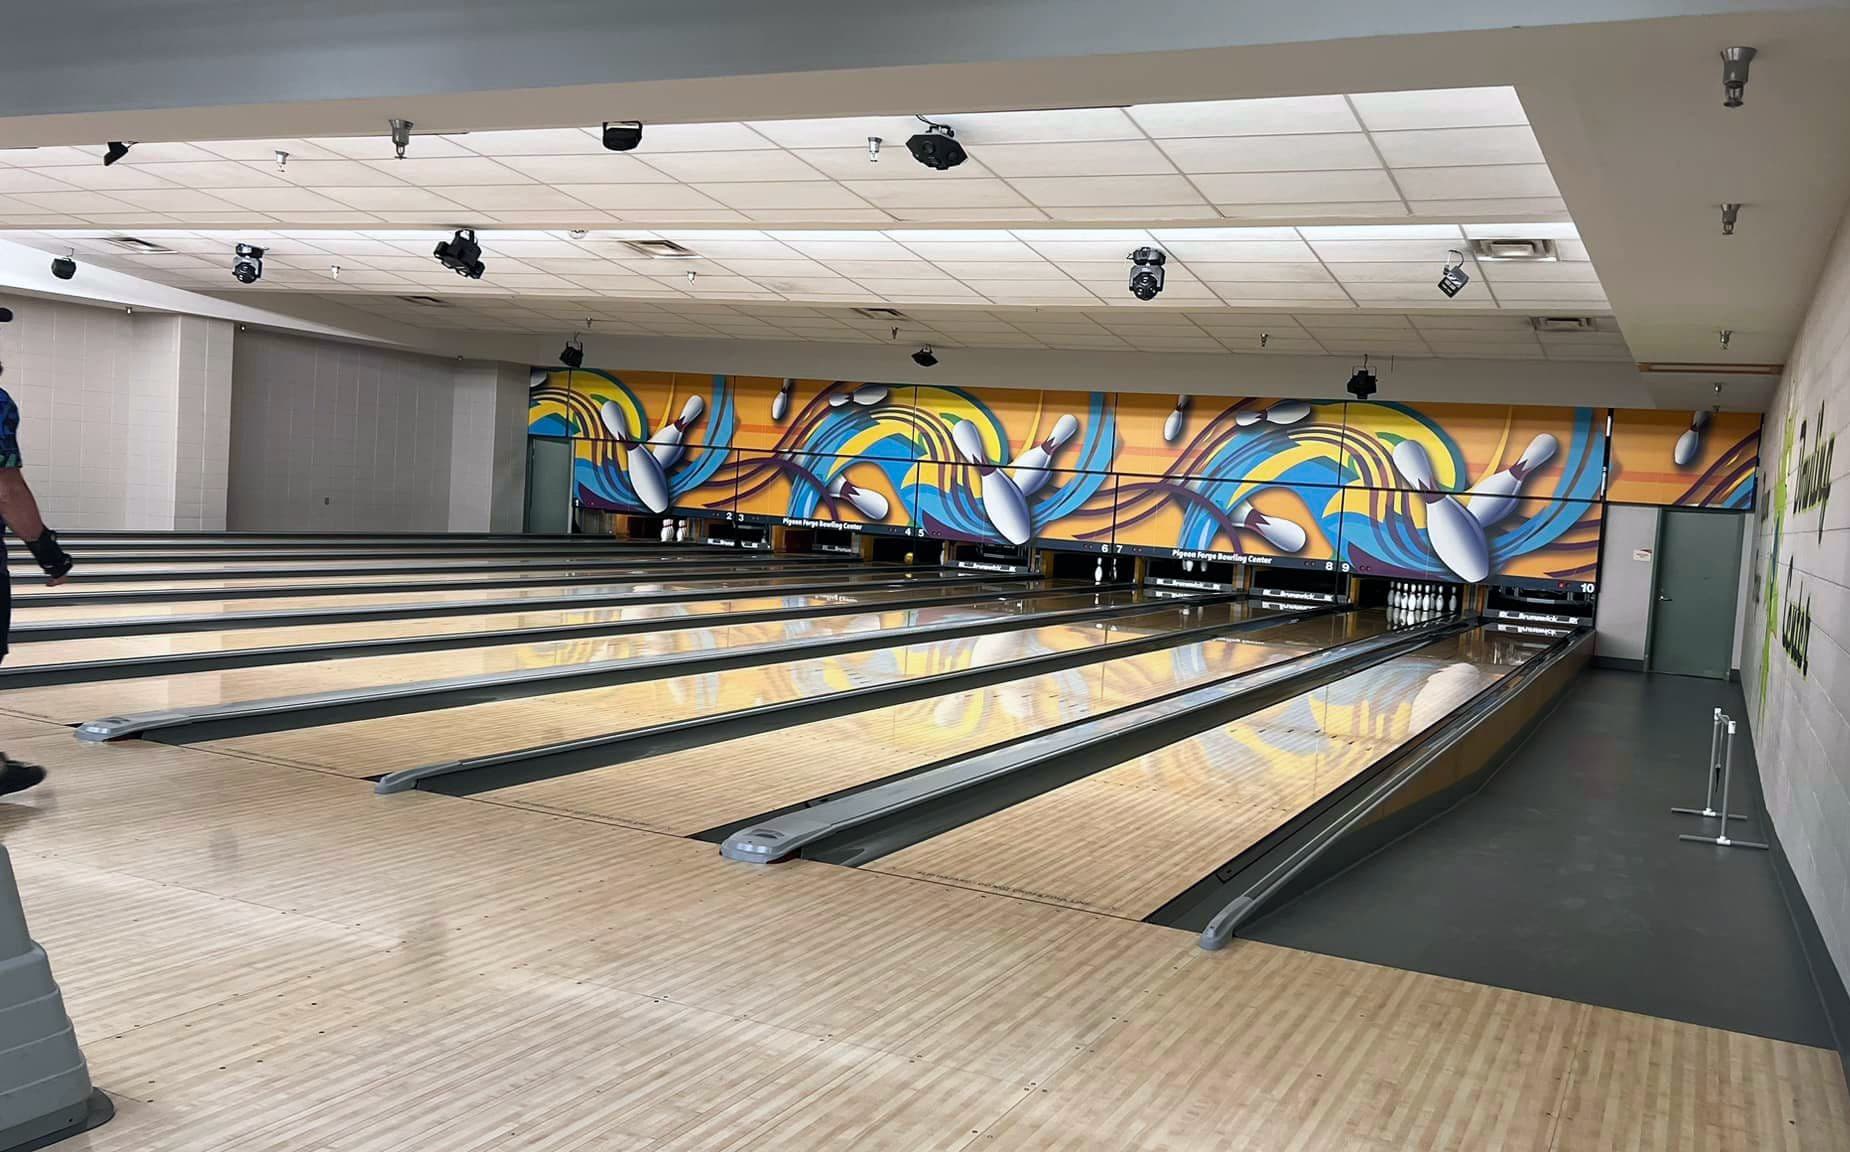 Pigeon Forge Community Center bowling